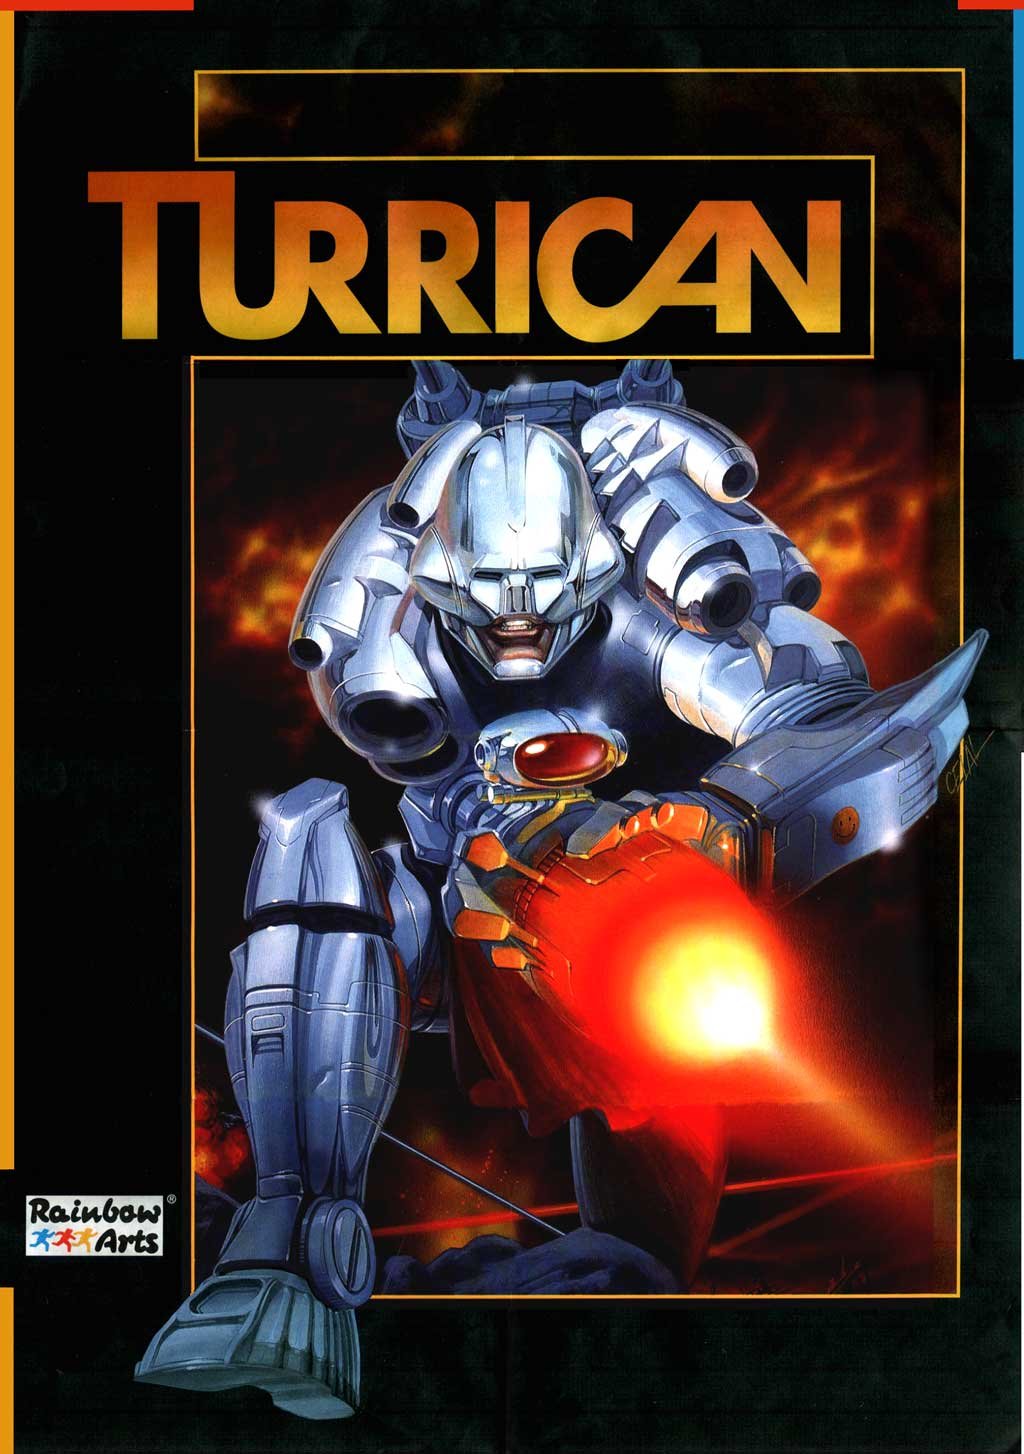 Image of Turrican